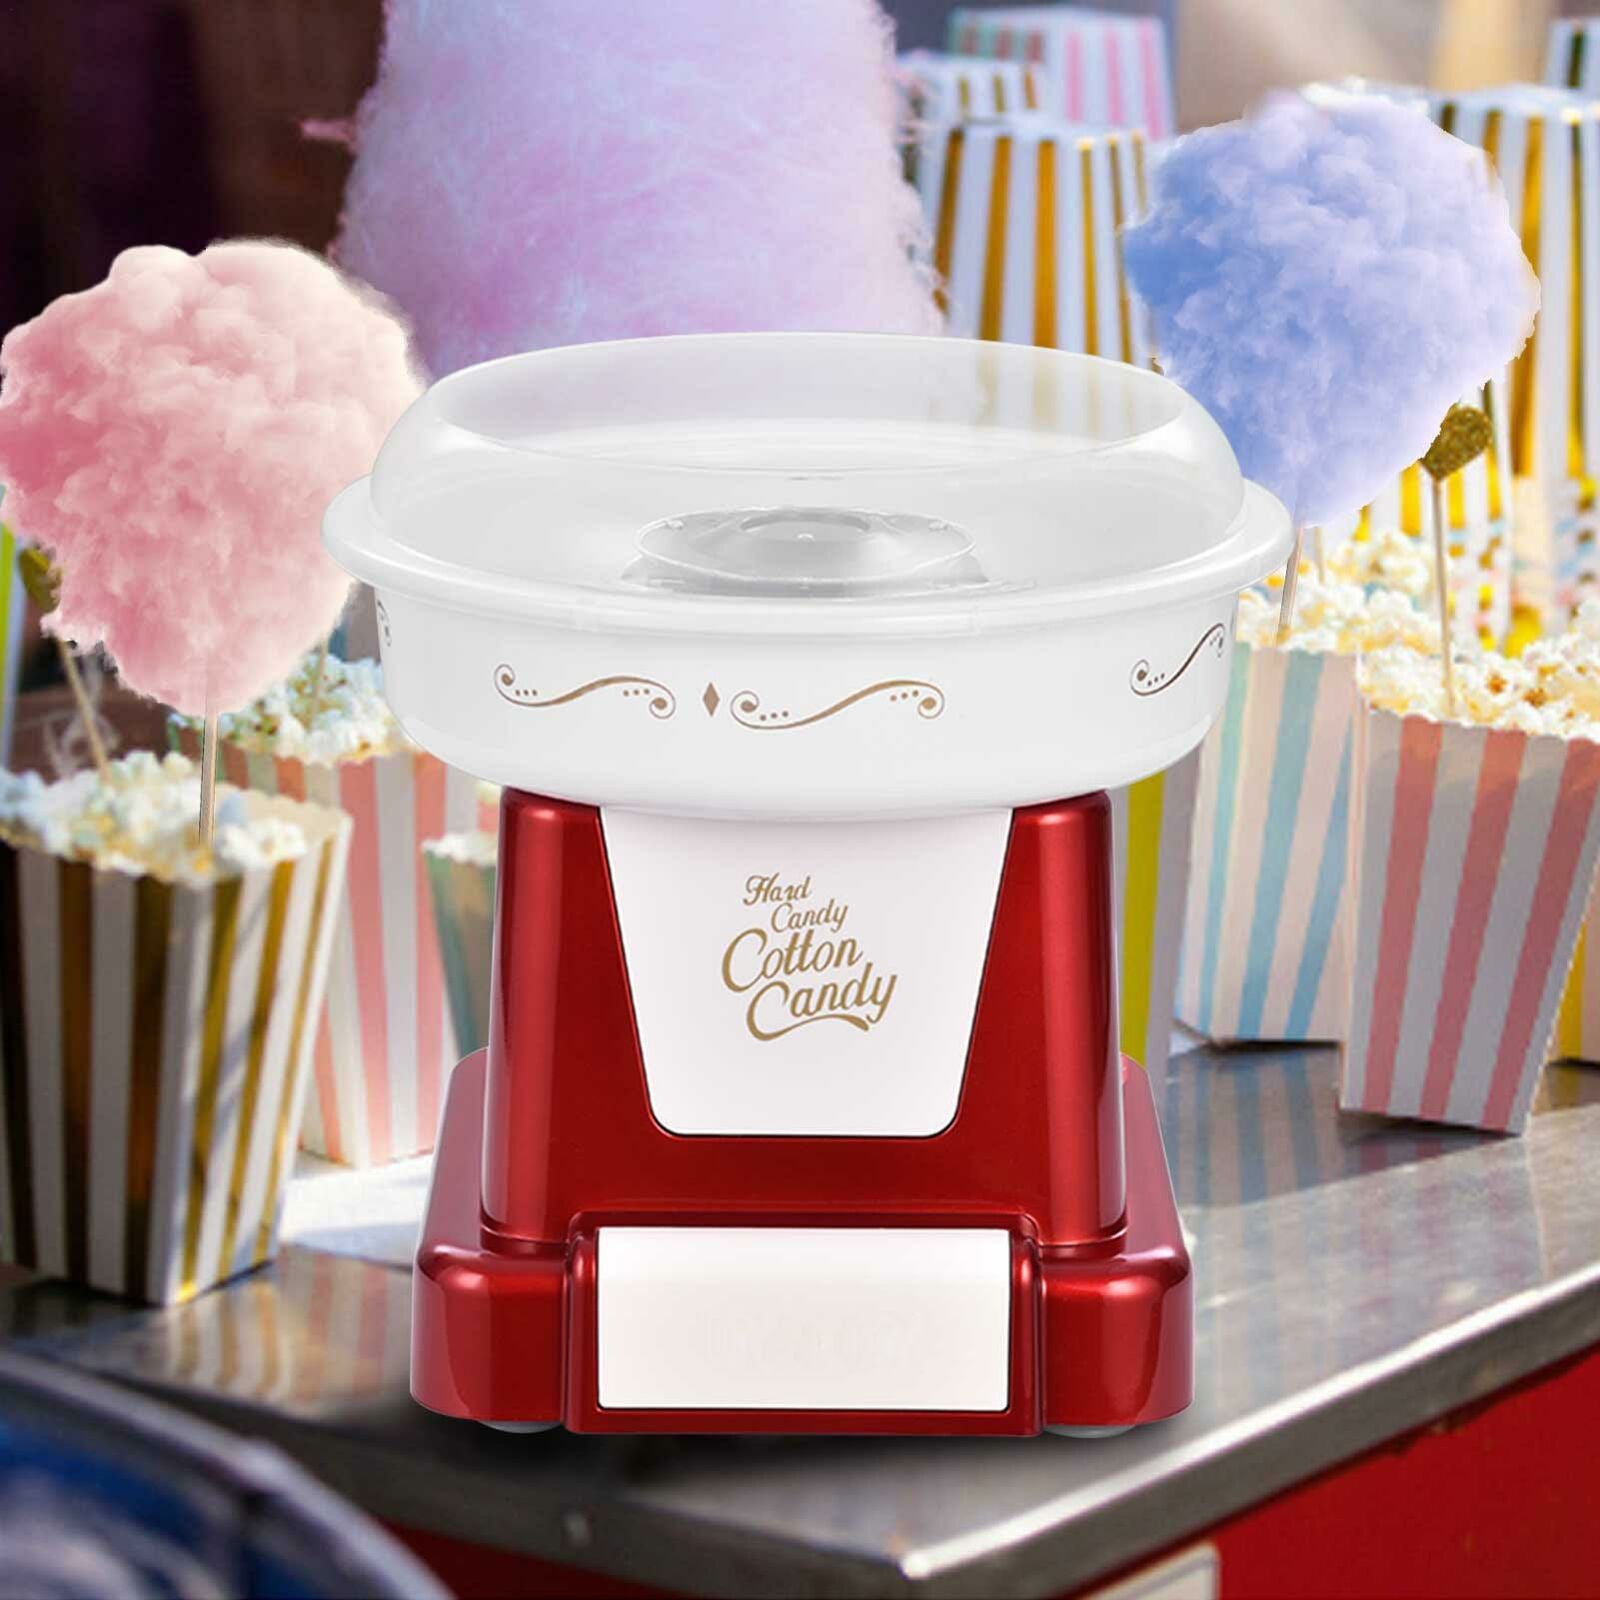 Marshmallow Sugar Machine Electric Mini Kids Gifts To Enjoy The Party Delicious